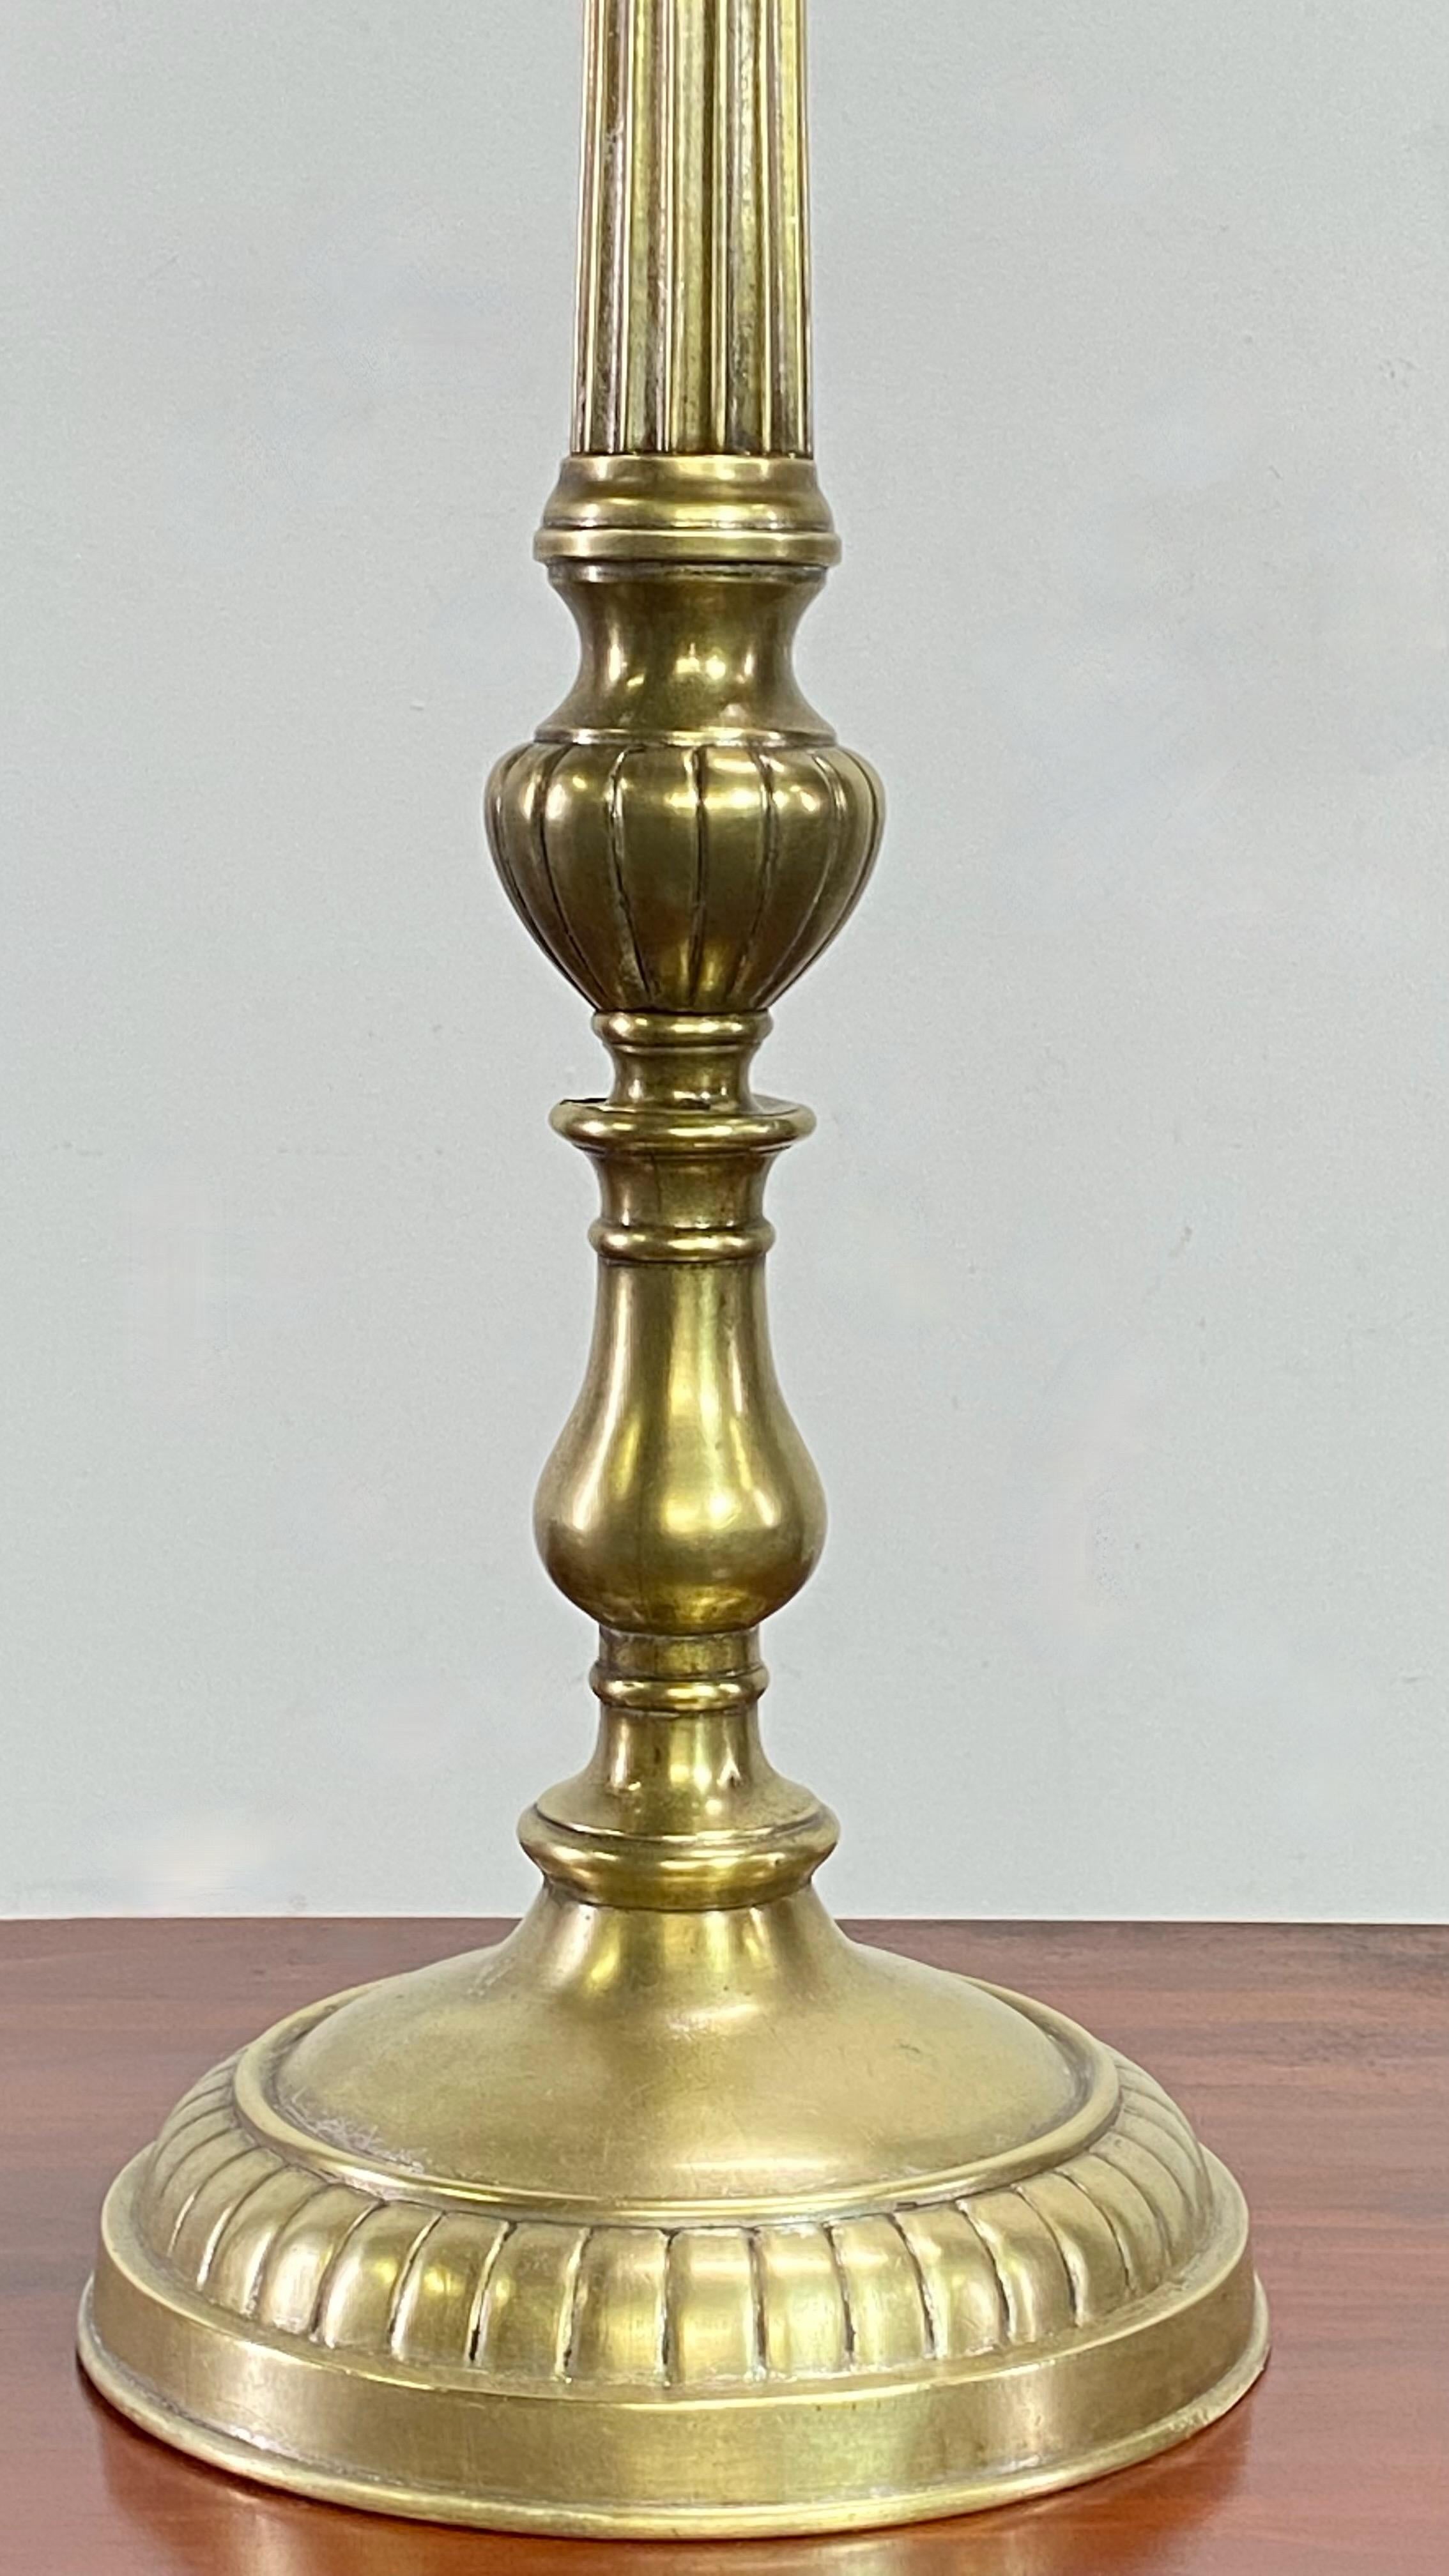 Pair of Early 19th Century European Brass Candlesticks, circa 1840 For Sale 2